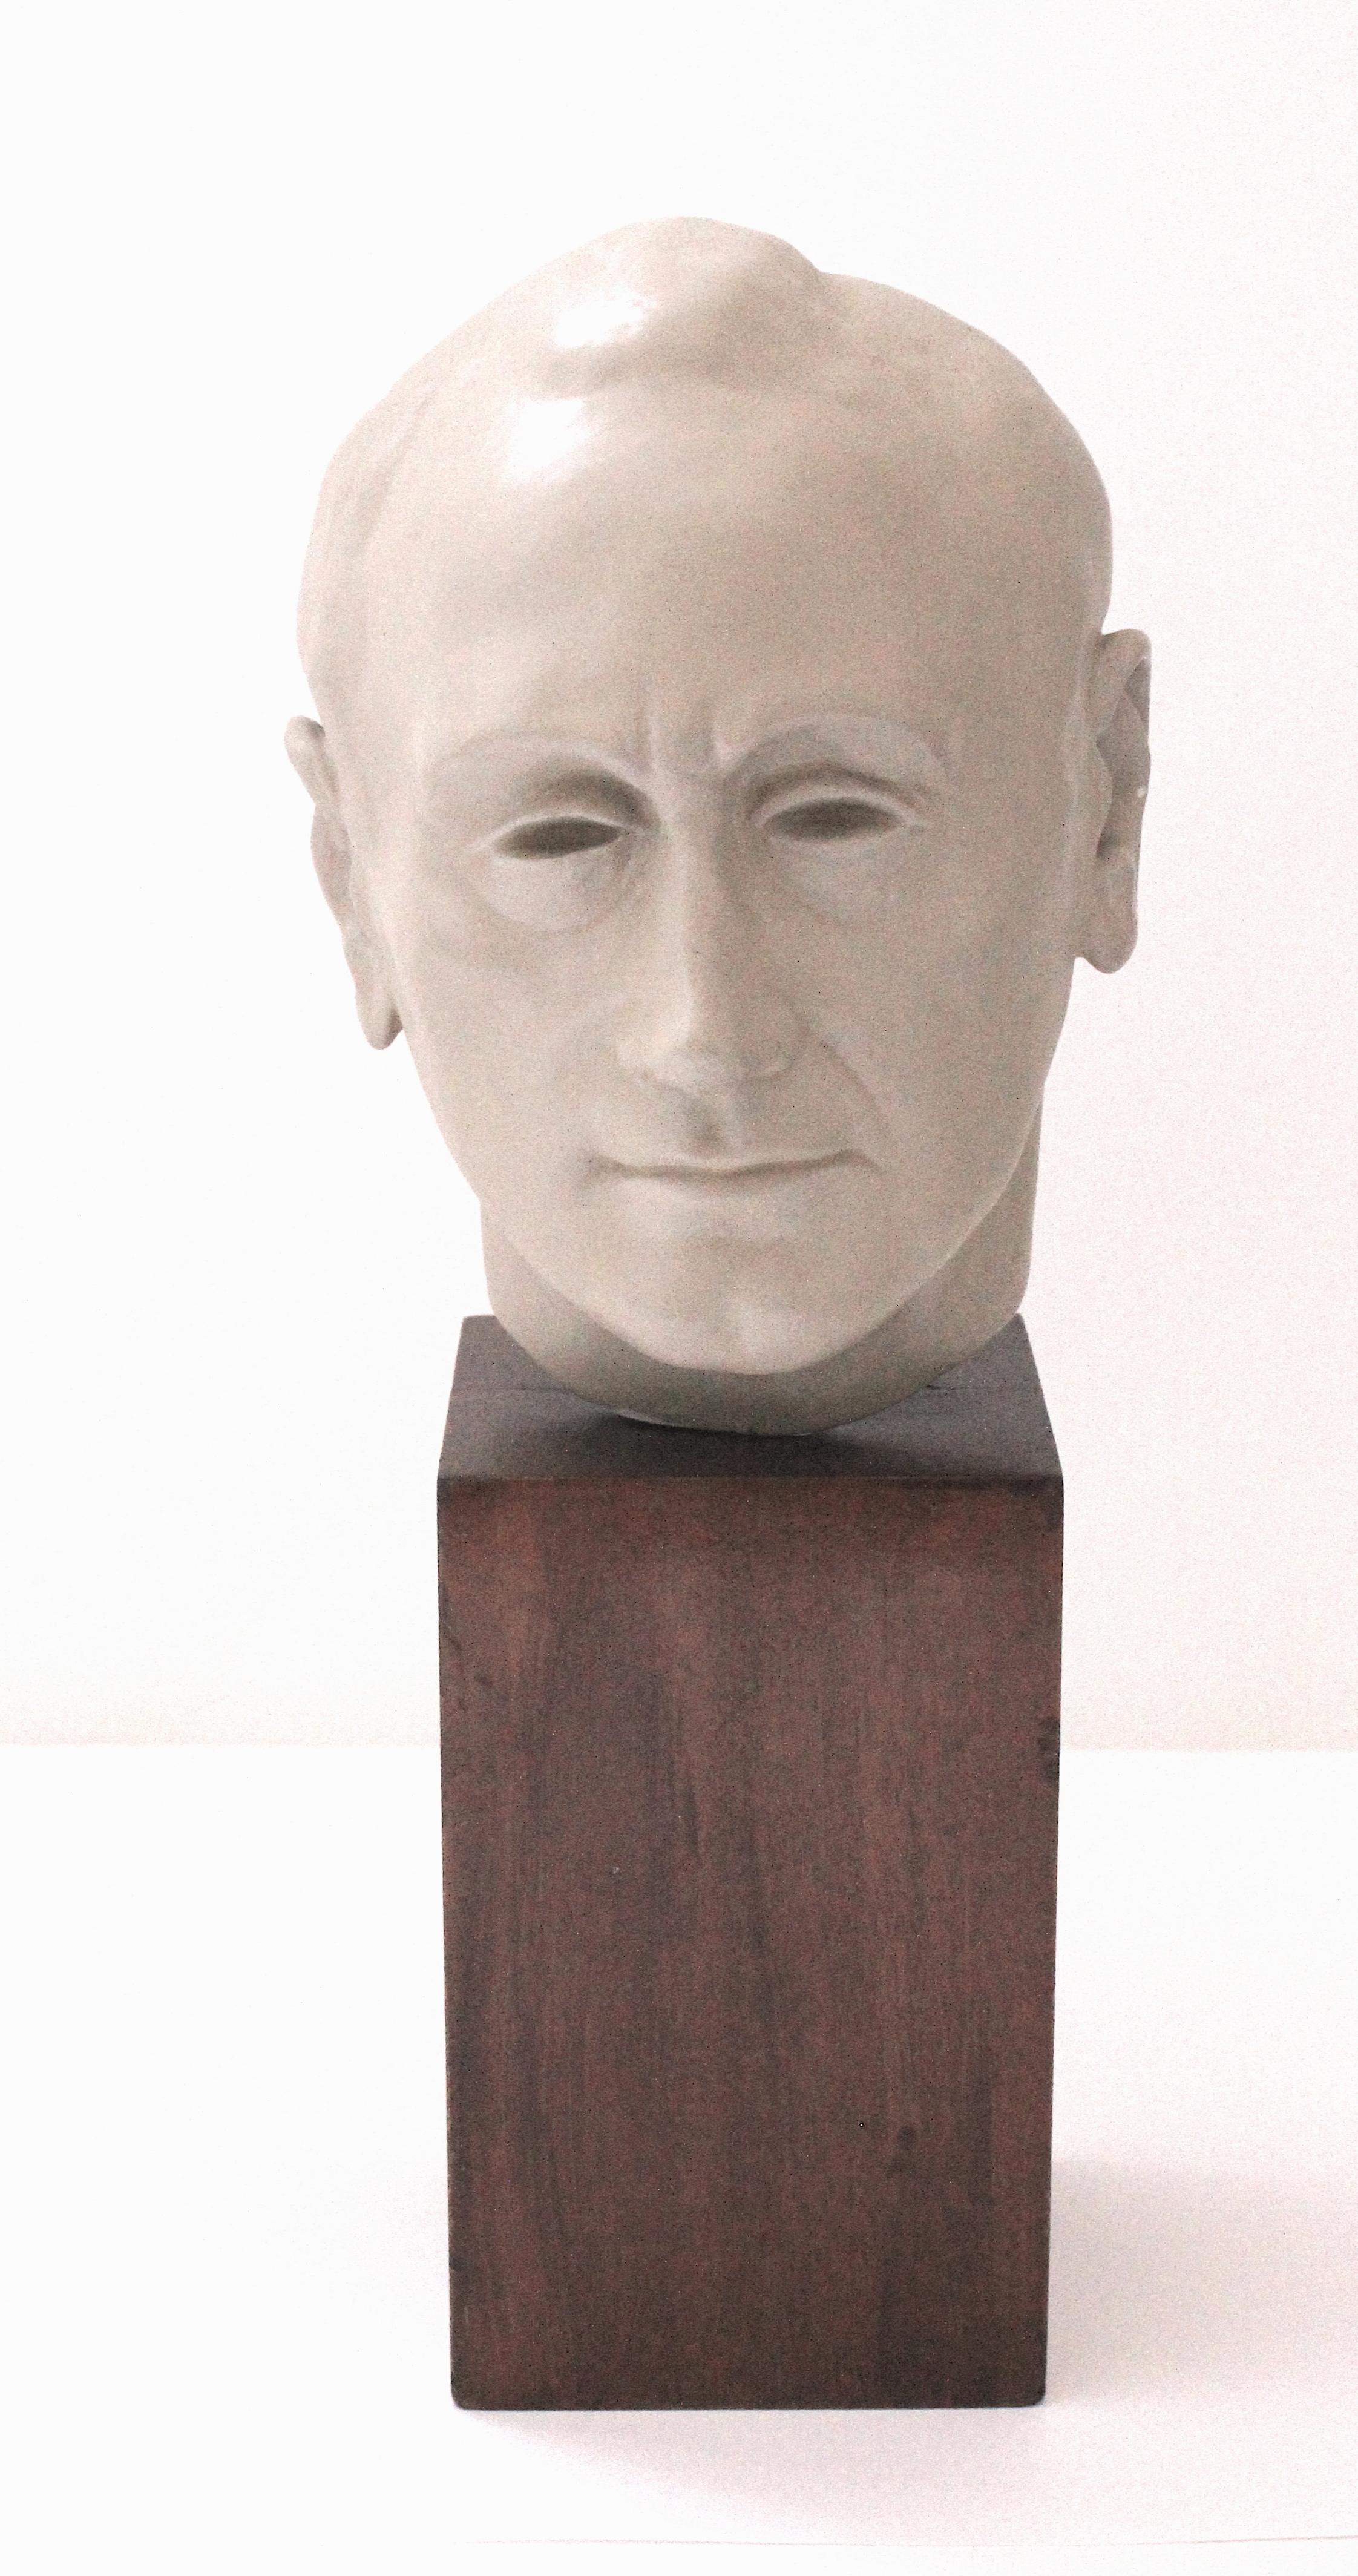 This iconic bust of the famed architect Morris Lapidus will be the perfect piece for a mid-century modernest collection. 

Note: The piece is fabricated in glazed ceramic on a walnut wood base. 

Note: Overall dimensions are 14.13